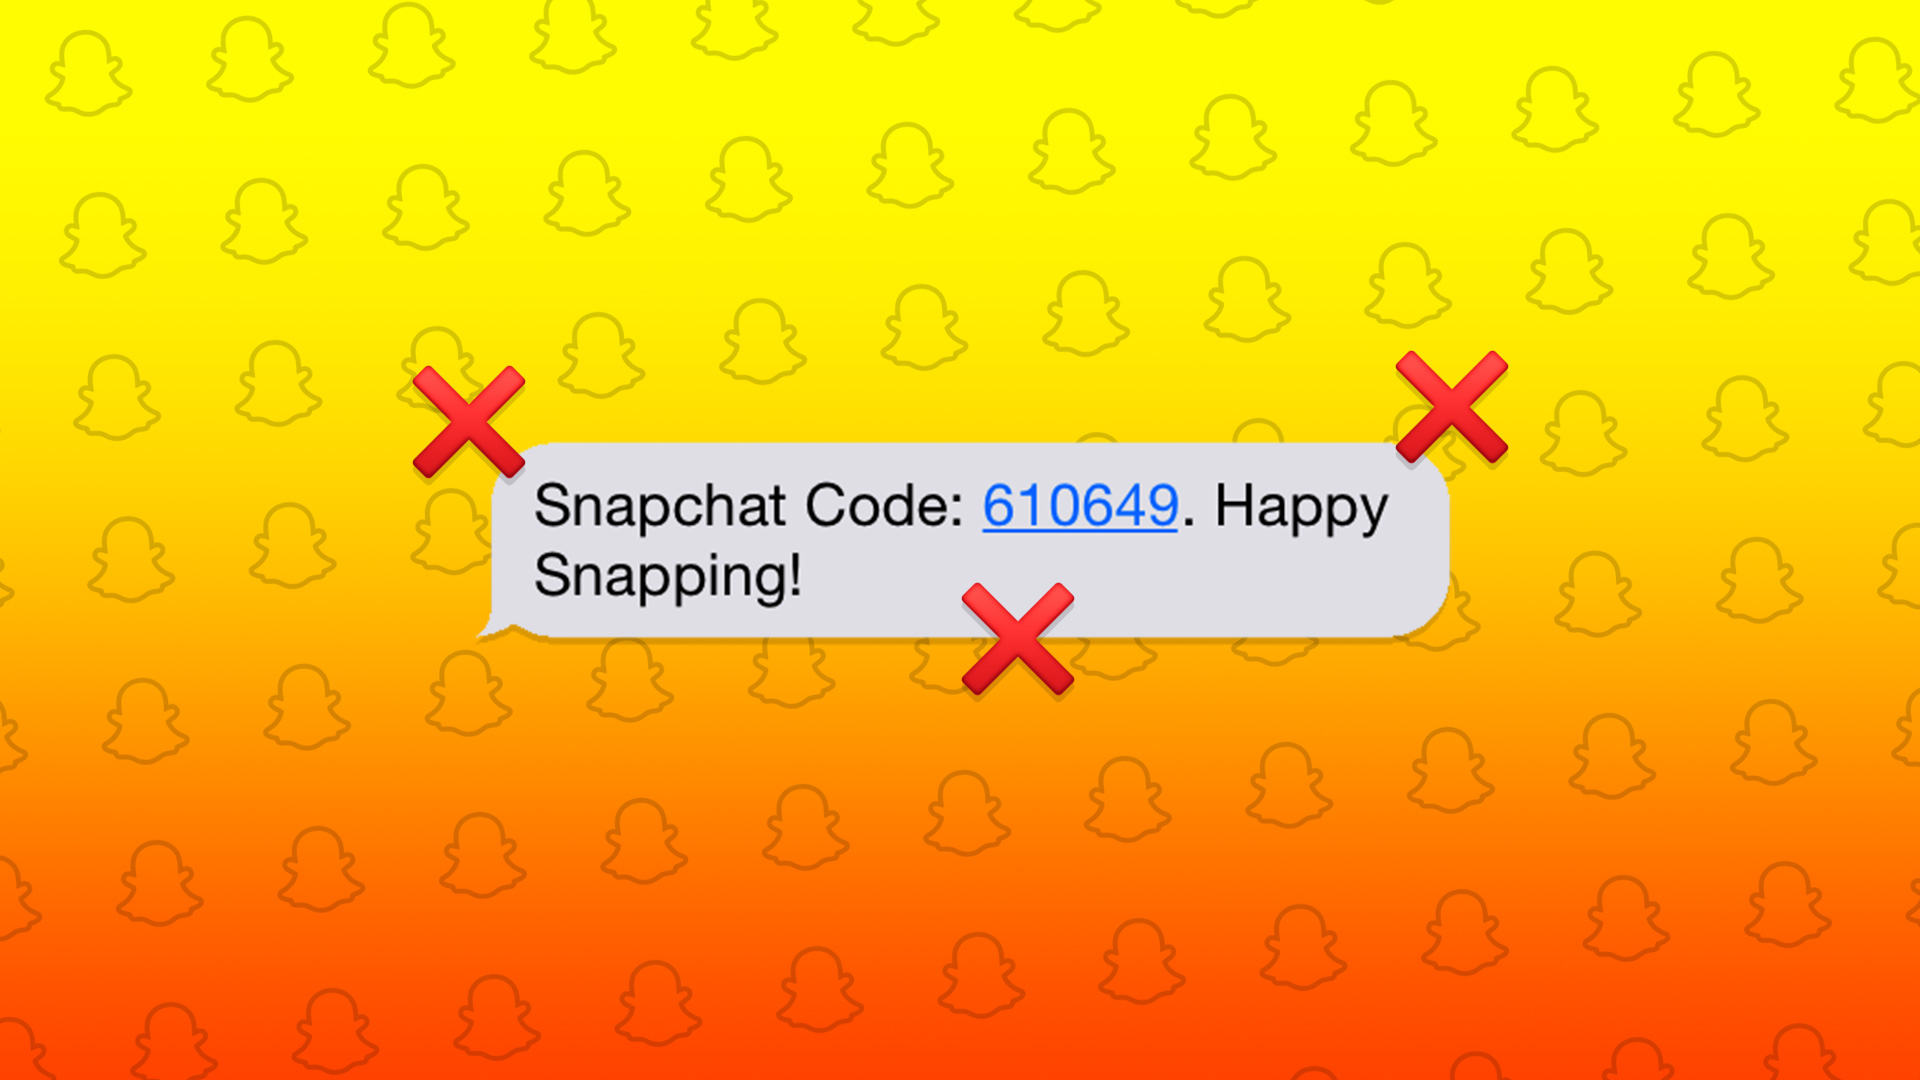 Fix Snapchat Not a Sending Security Code Issue